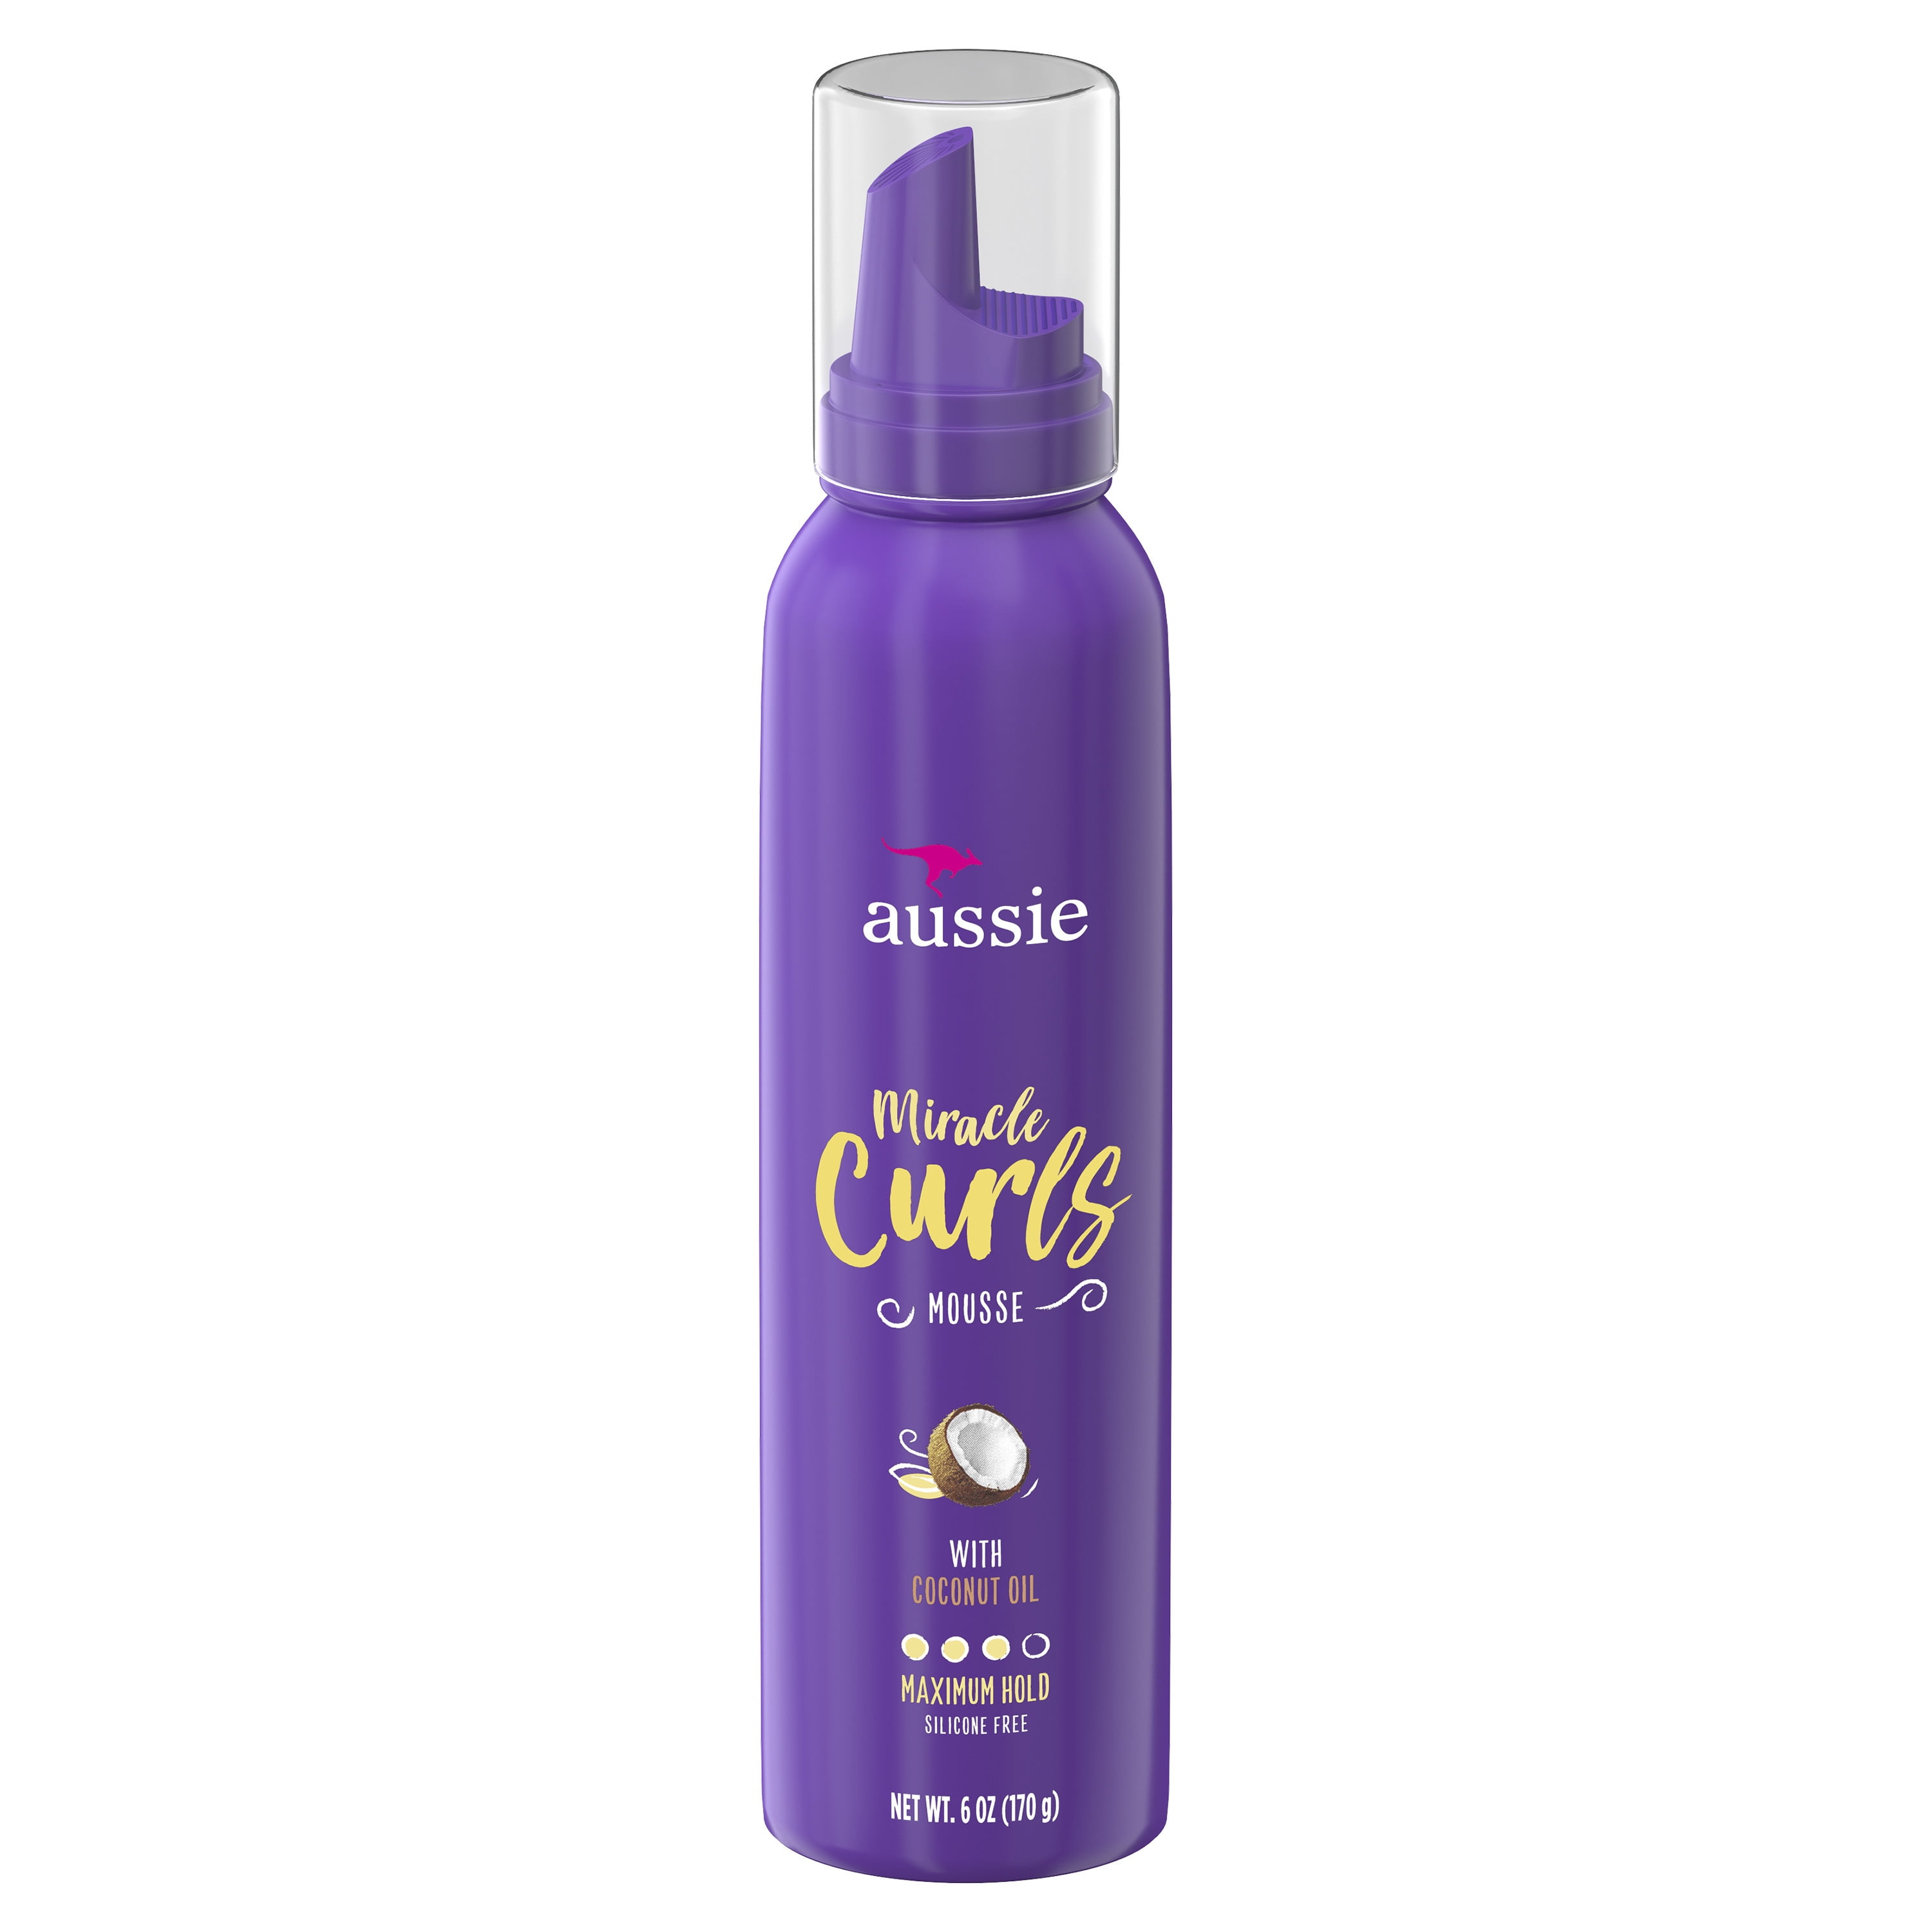 Aussie Miracle Curls Styling Mousse with Coconut & Jojoba Oil,  fl oz -  